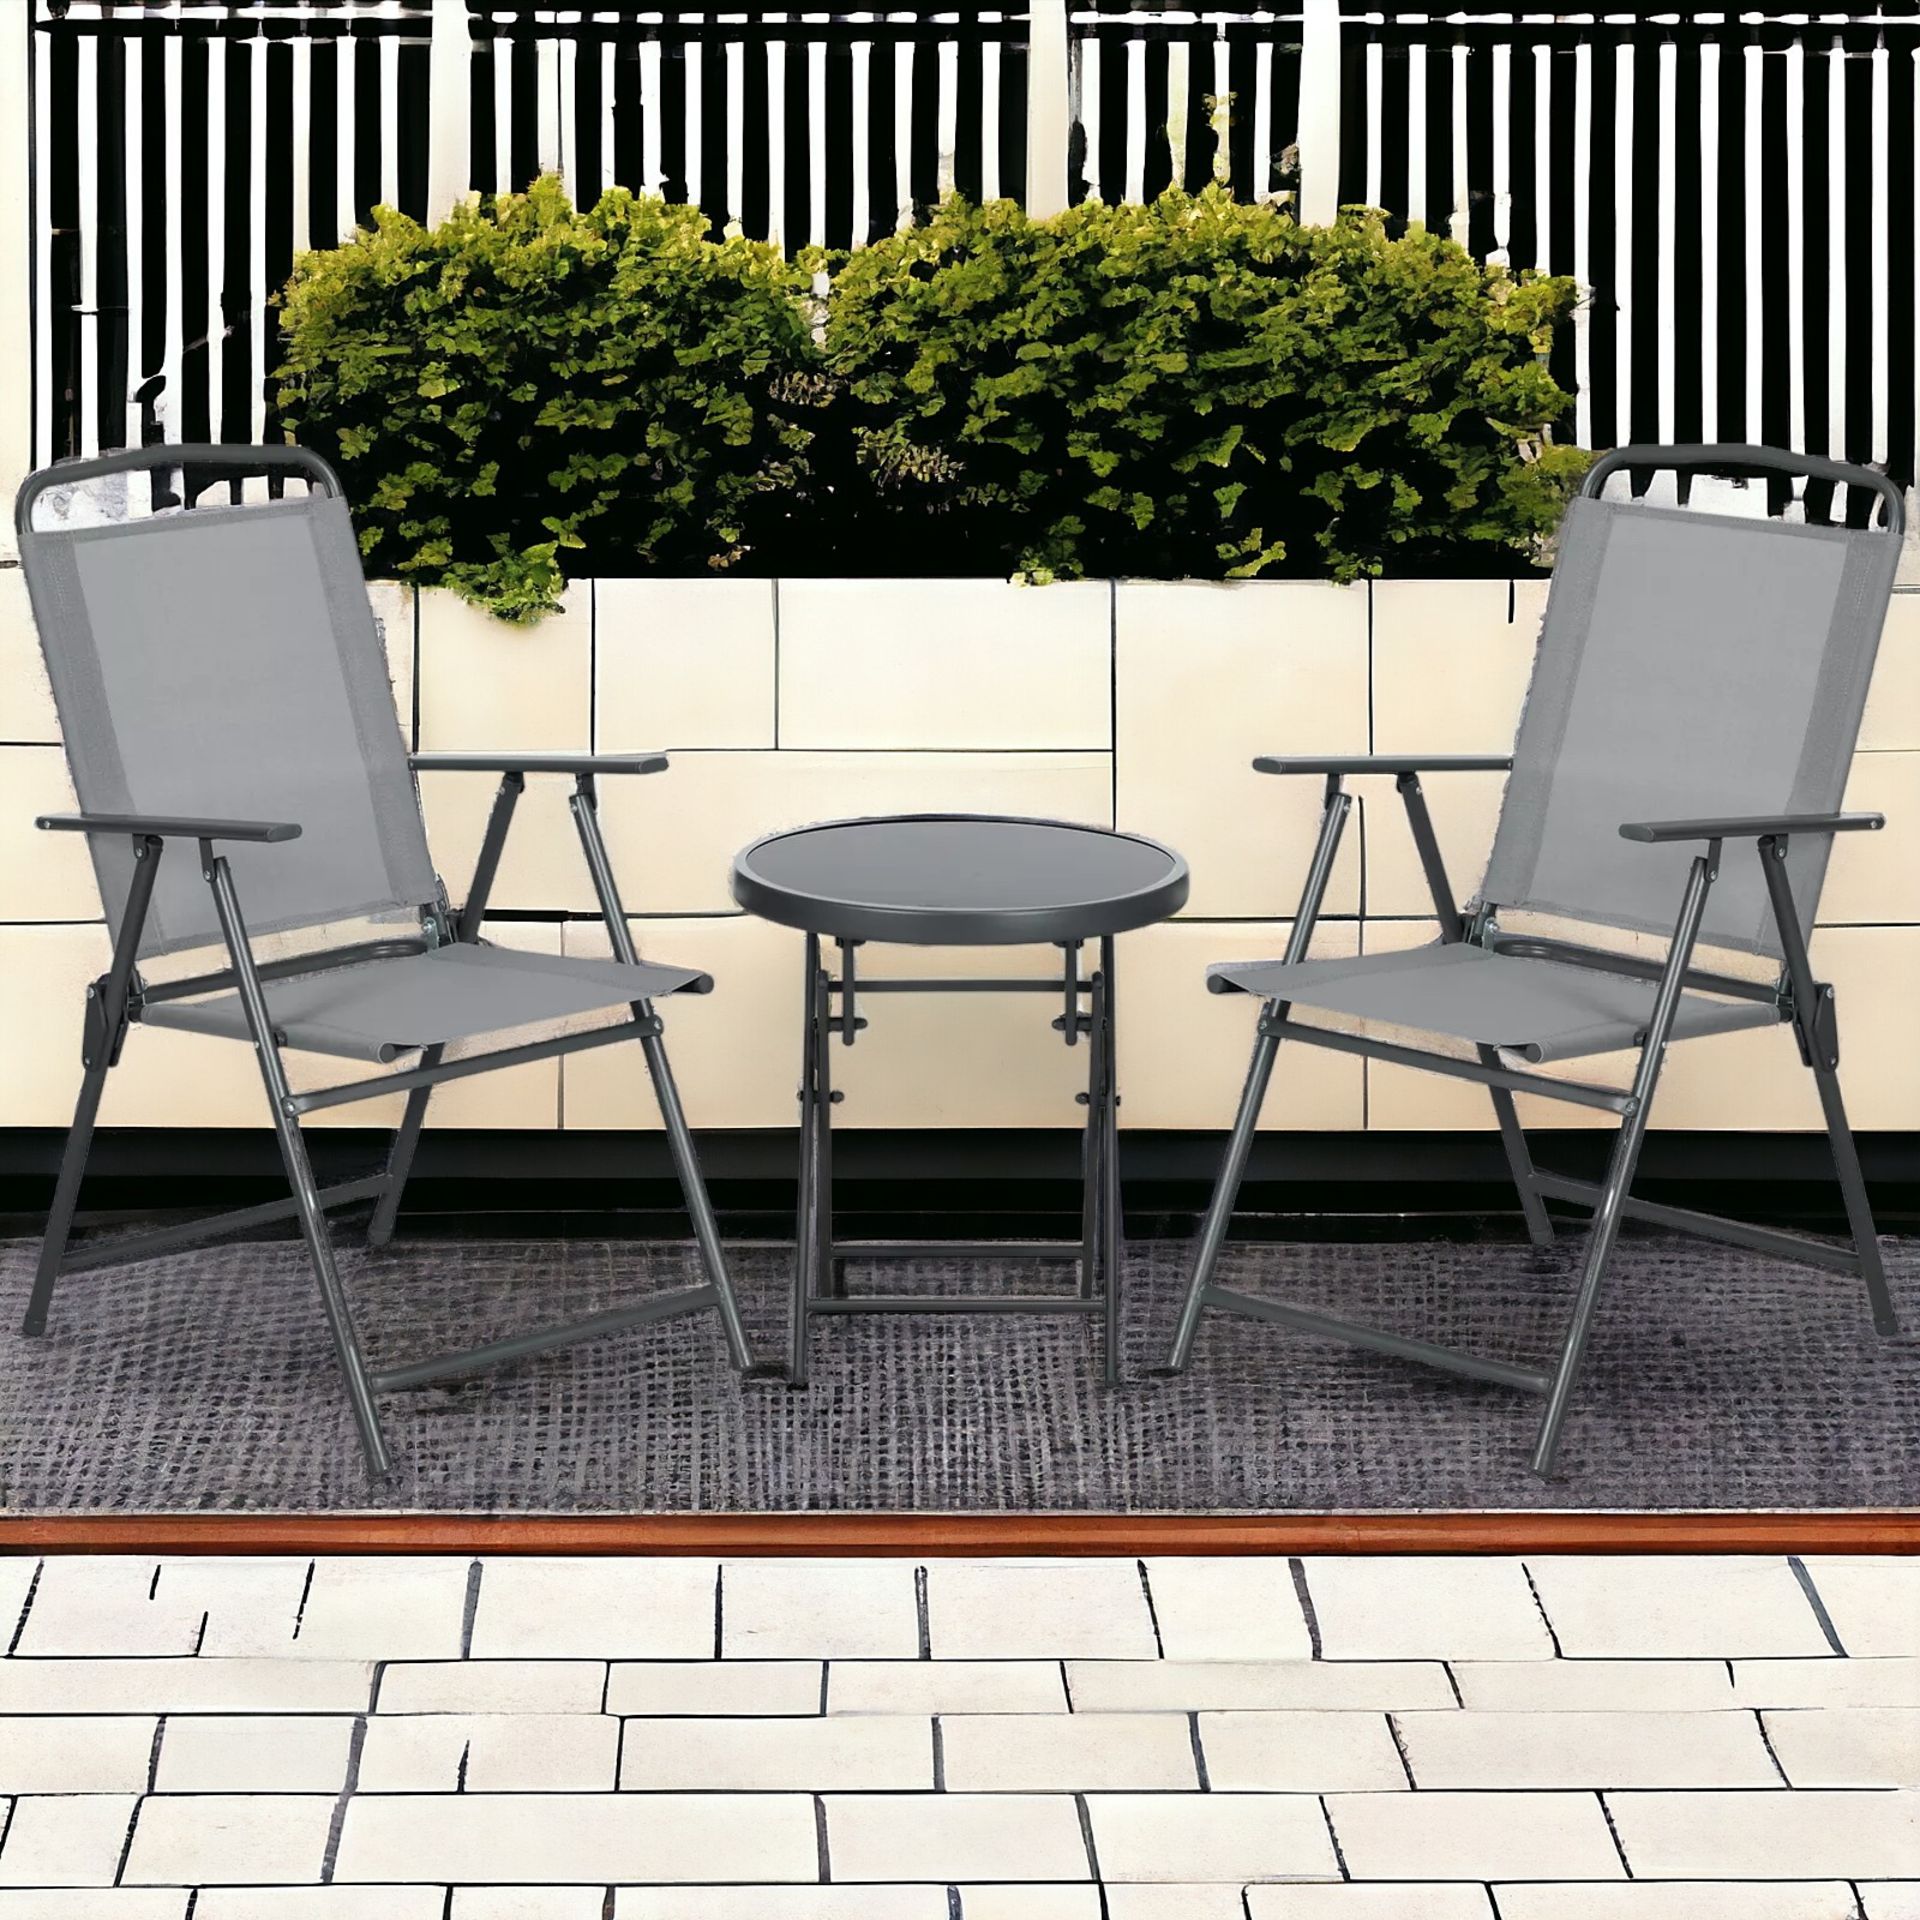 FREE DELIVERY- BRAND NEW PATIO BISTRO SET FOLDING CHAIRS & COFFEE TABLE FOR BALCONY,GREY - Image 2 of 2